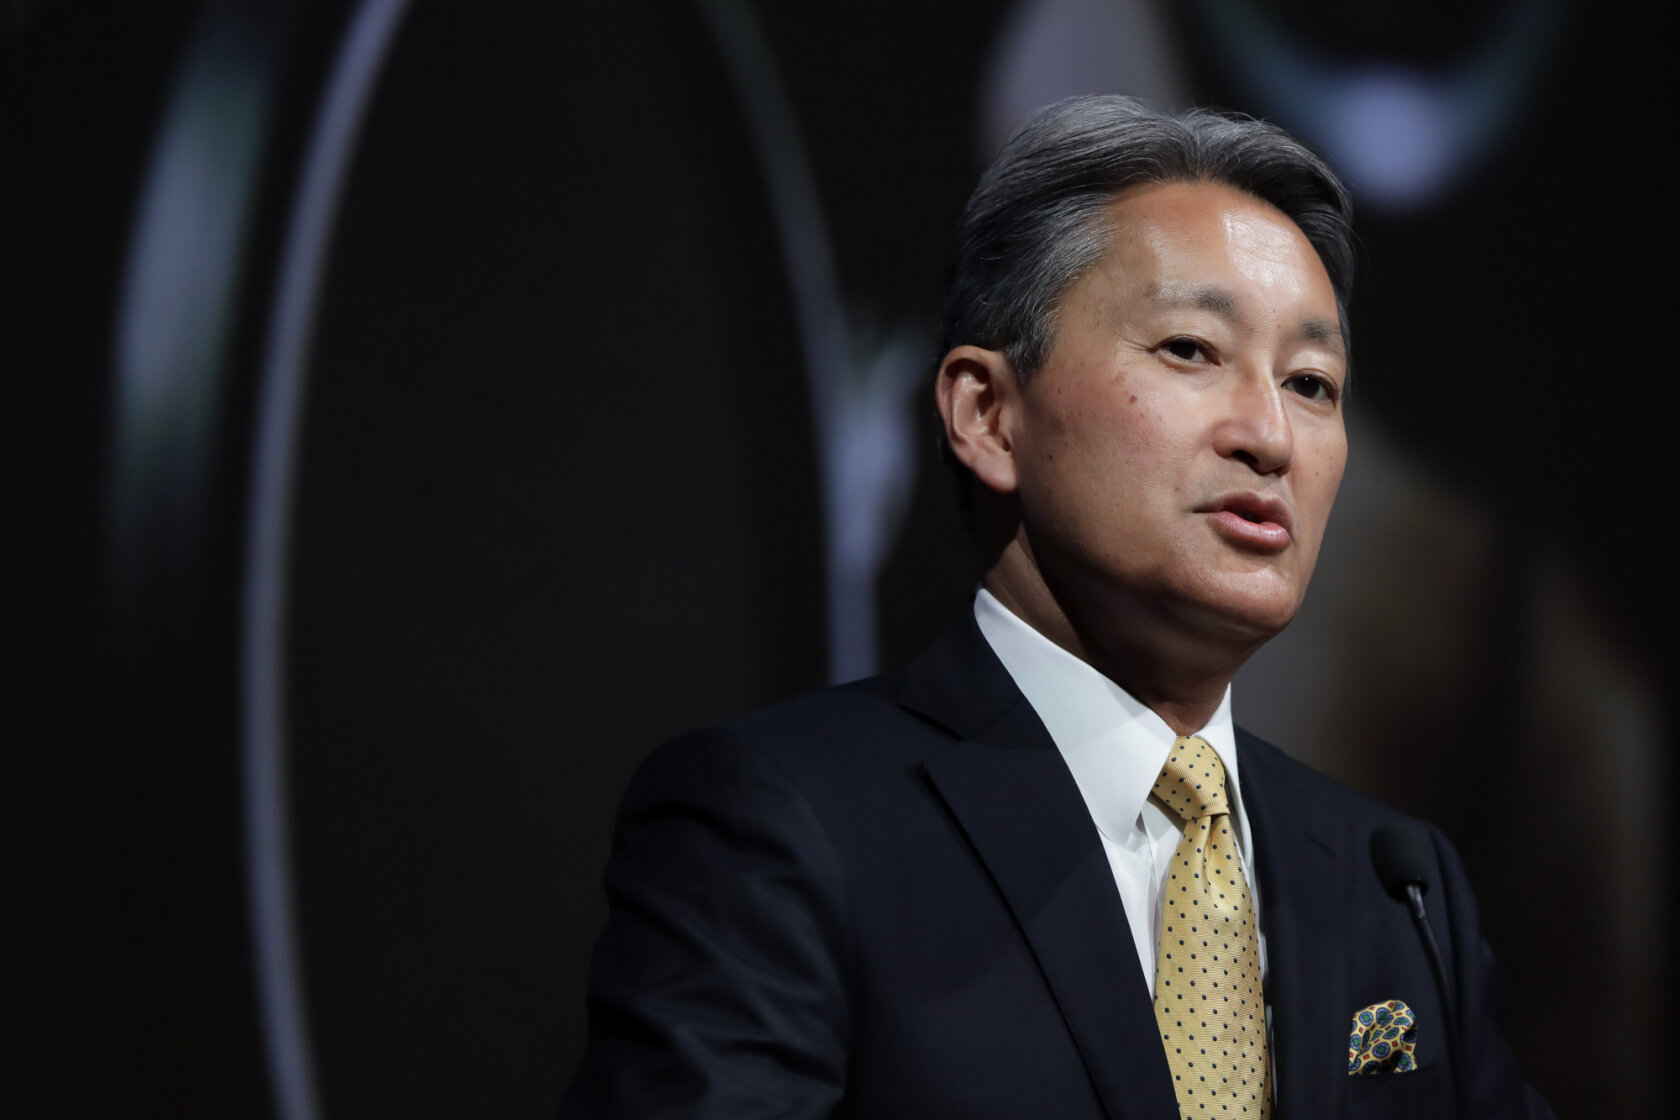 Kaz Hirai is stepping down as Sony's CEO, will move into company chairman role